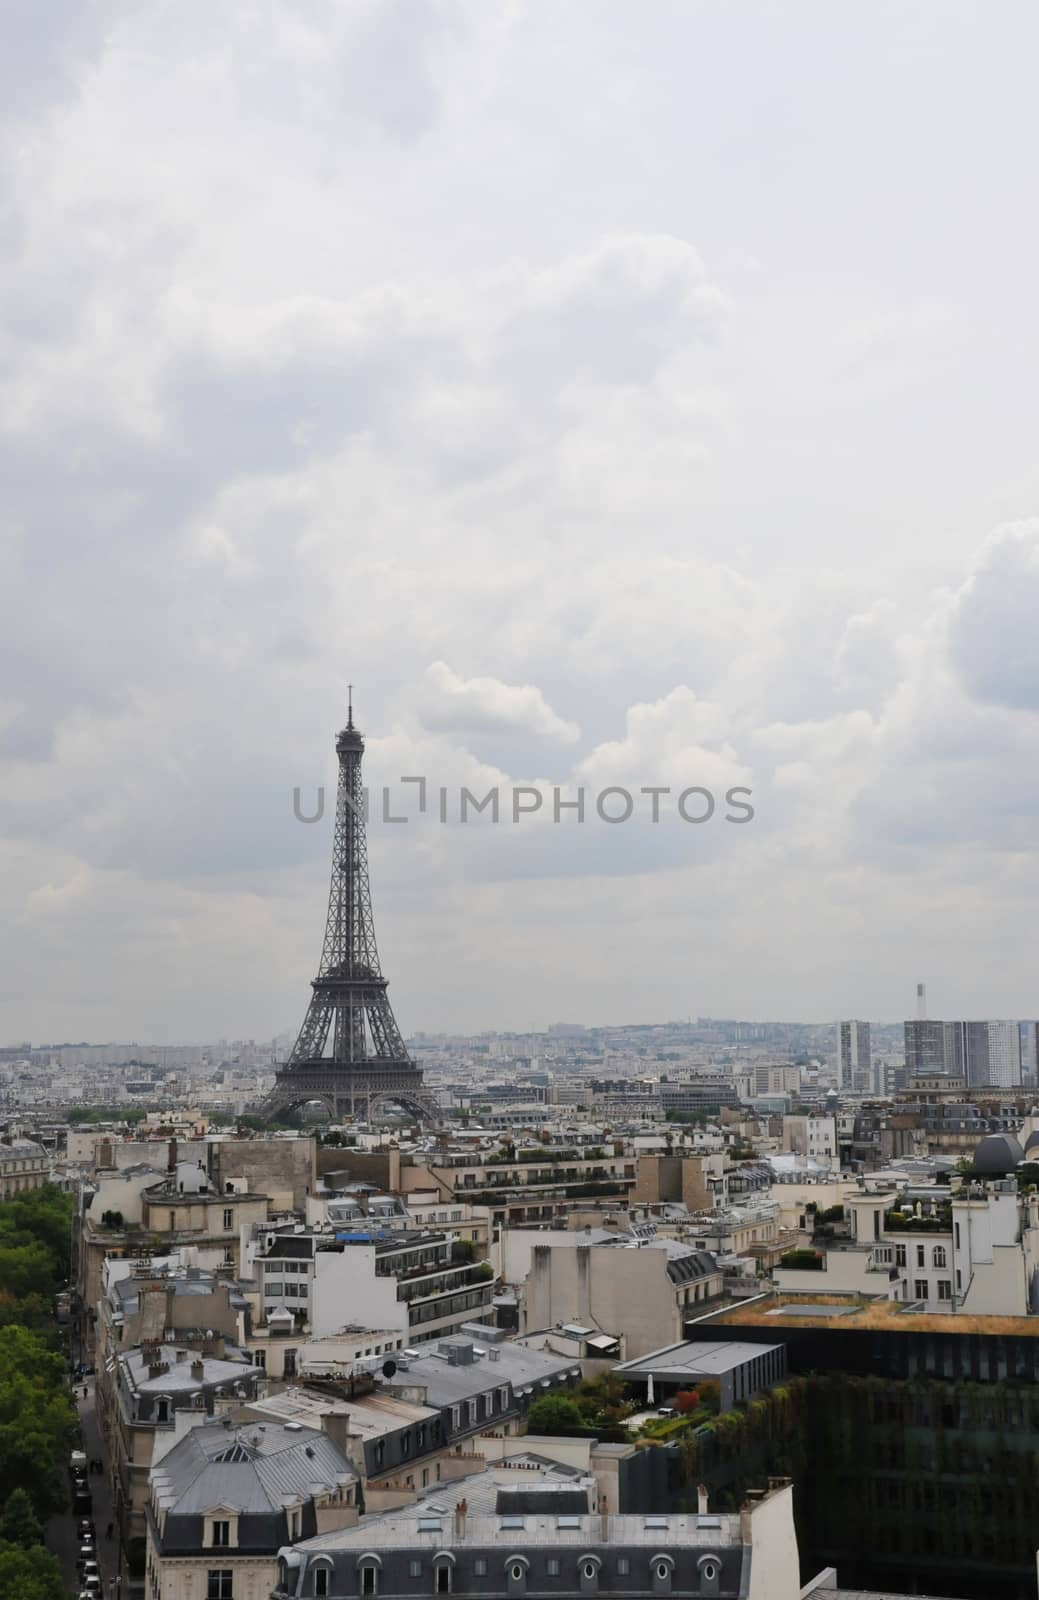 Eiffel Tower in Paris by shkyo30